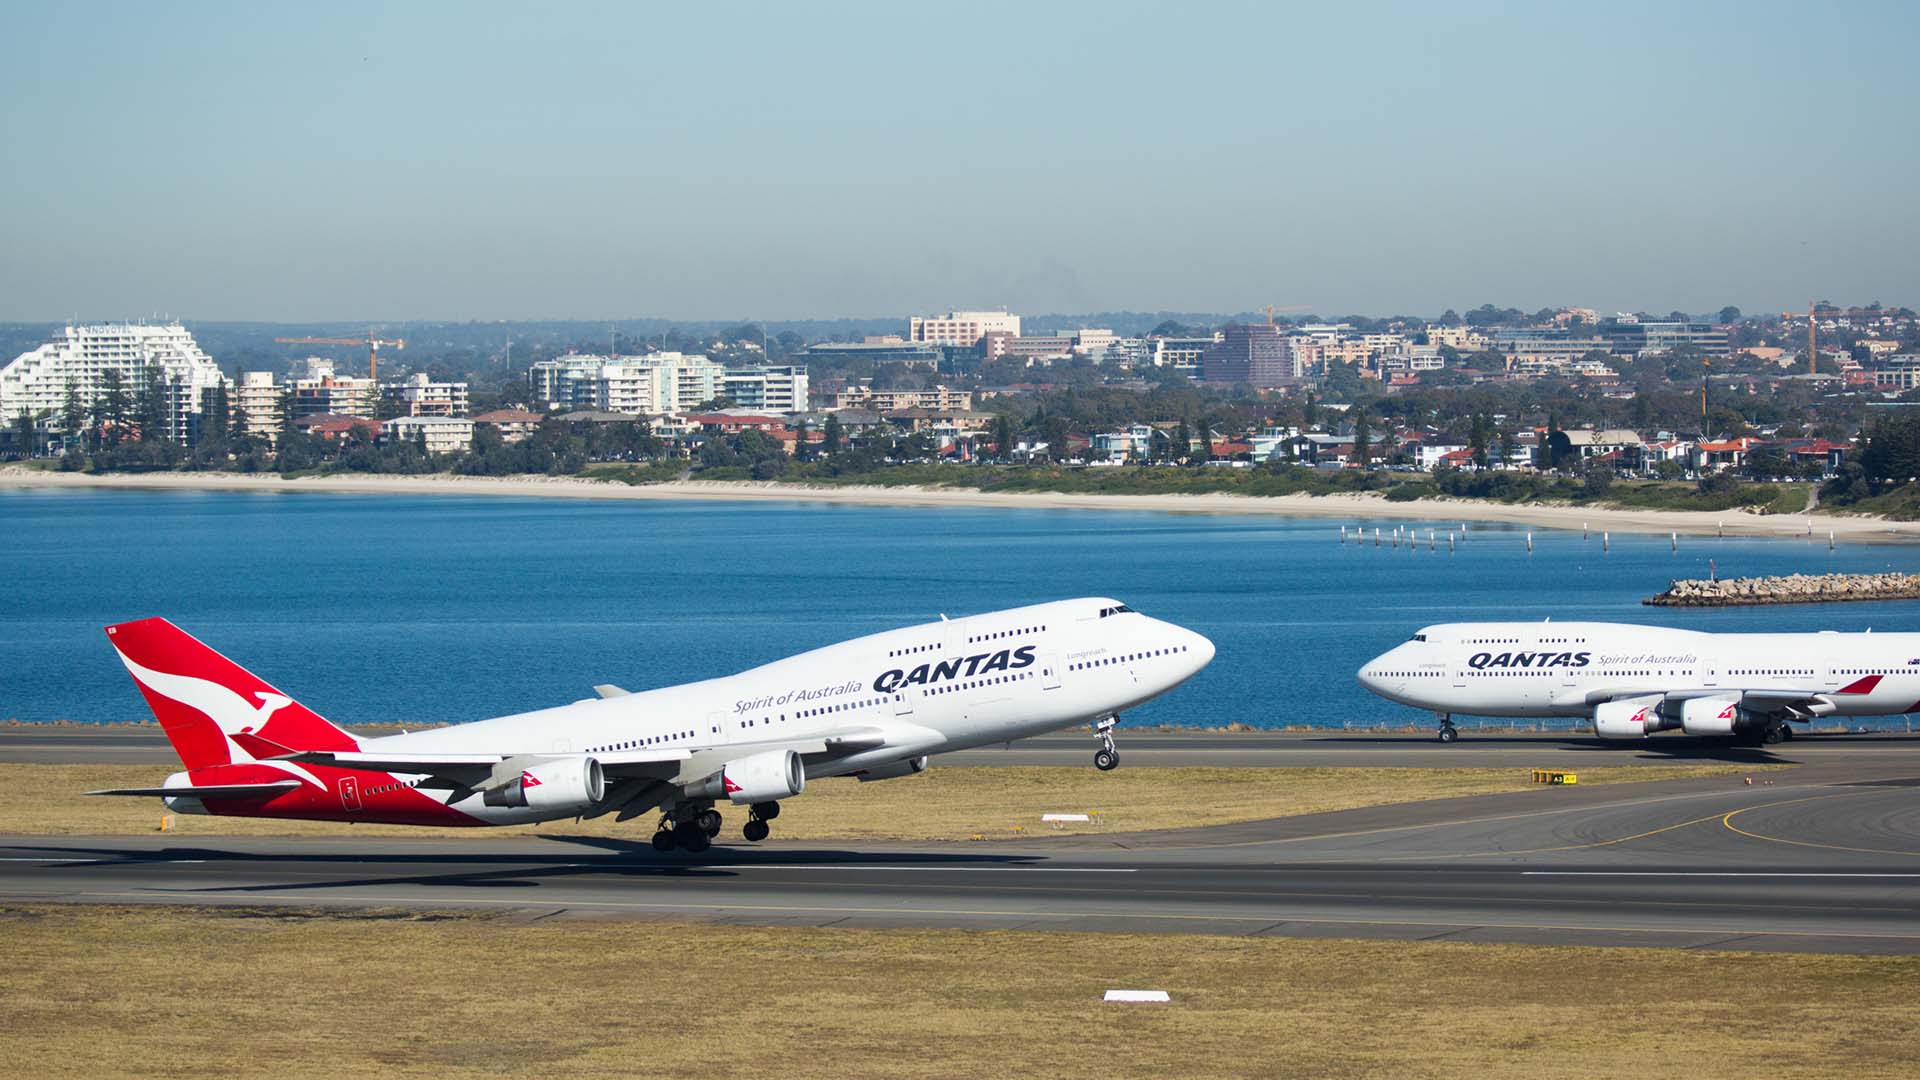 Qantas and Jetstar Are Drastically Cutting International and Domestic Flights Until the End of May